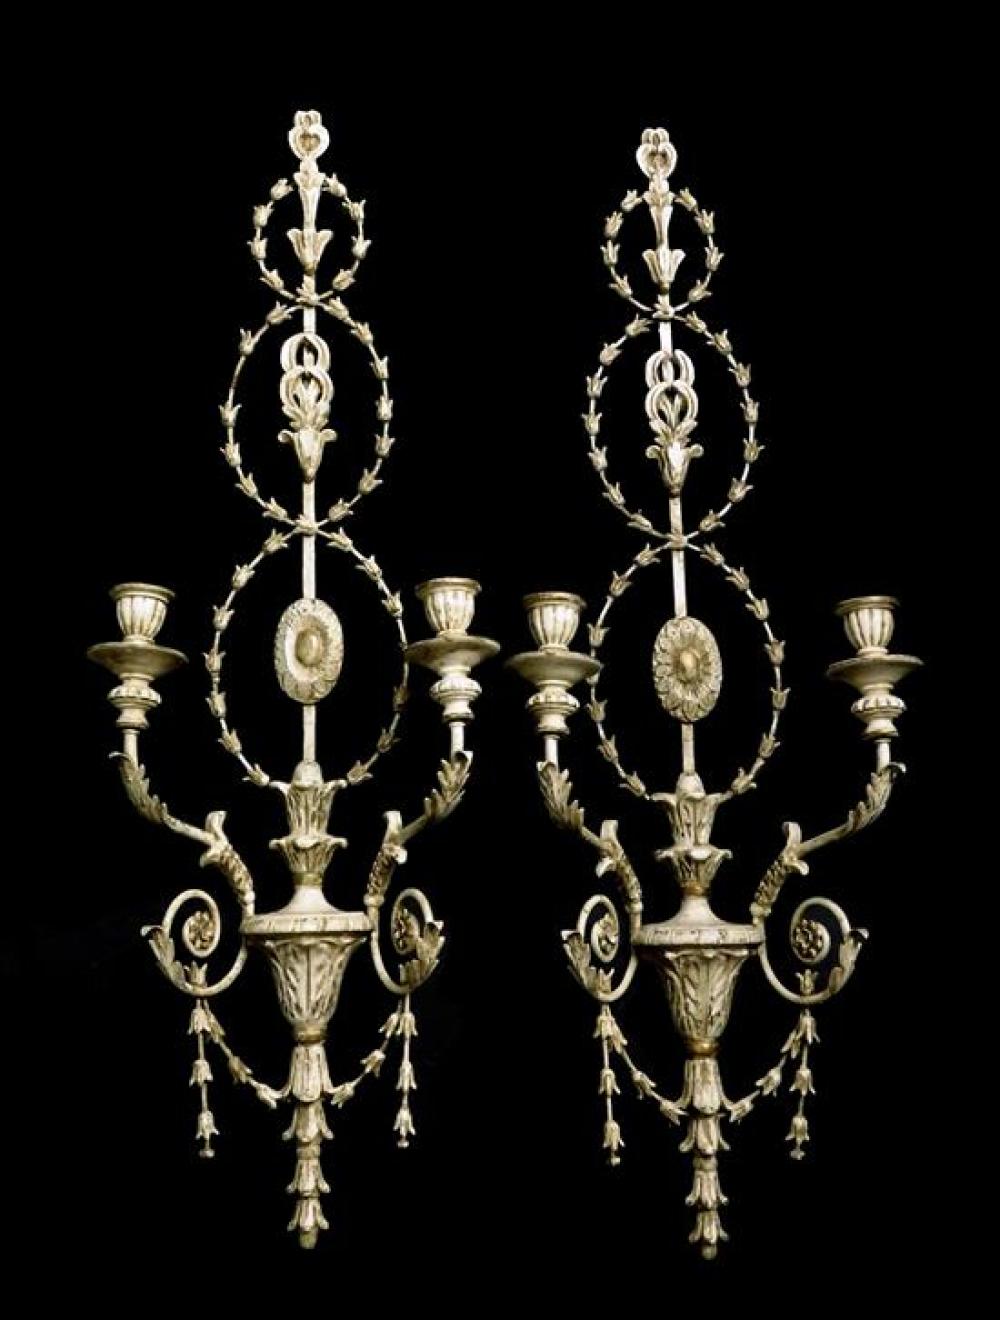 PAIR OF LARGE WOOD AND METAL SCONCES 31c0fe